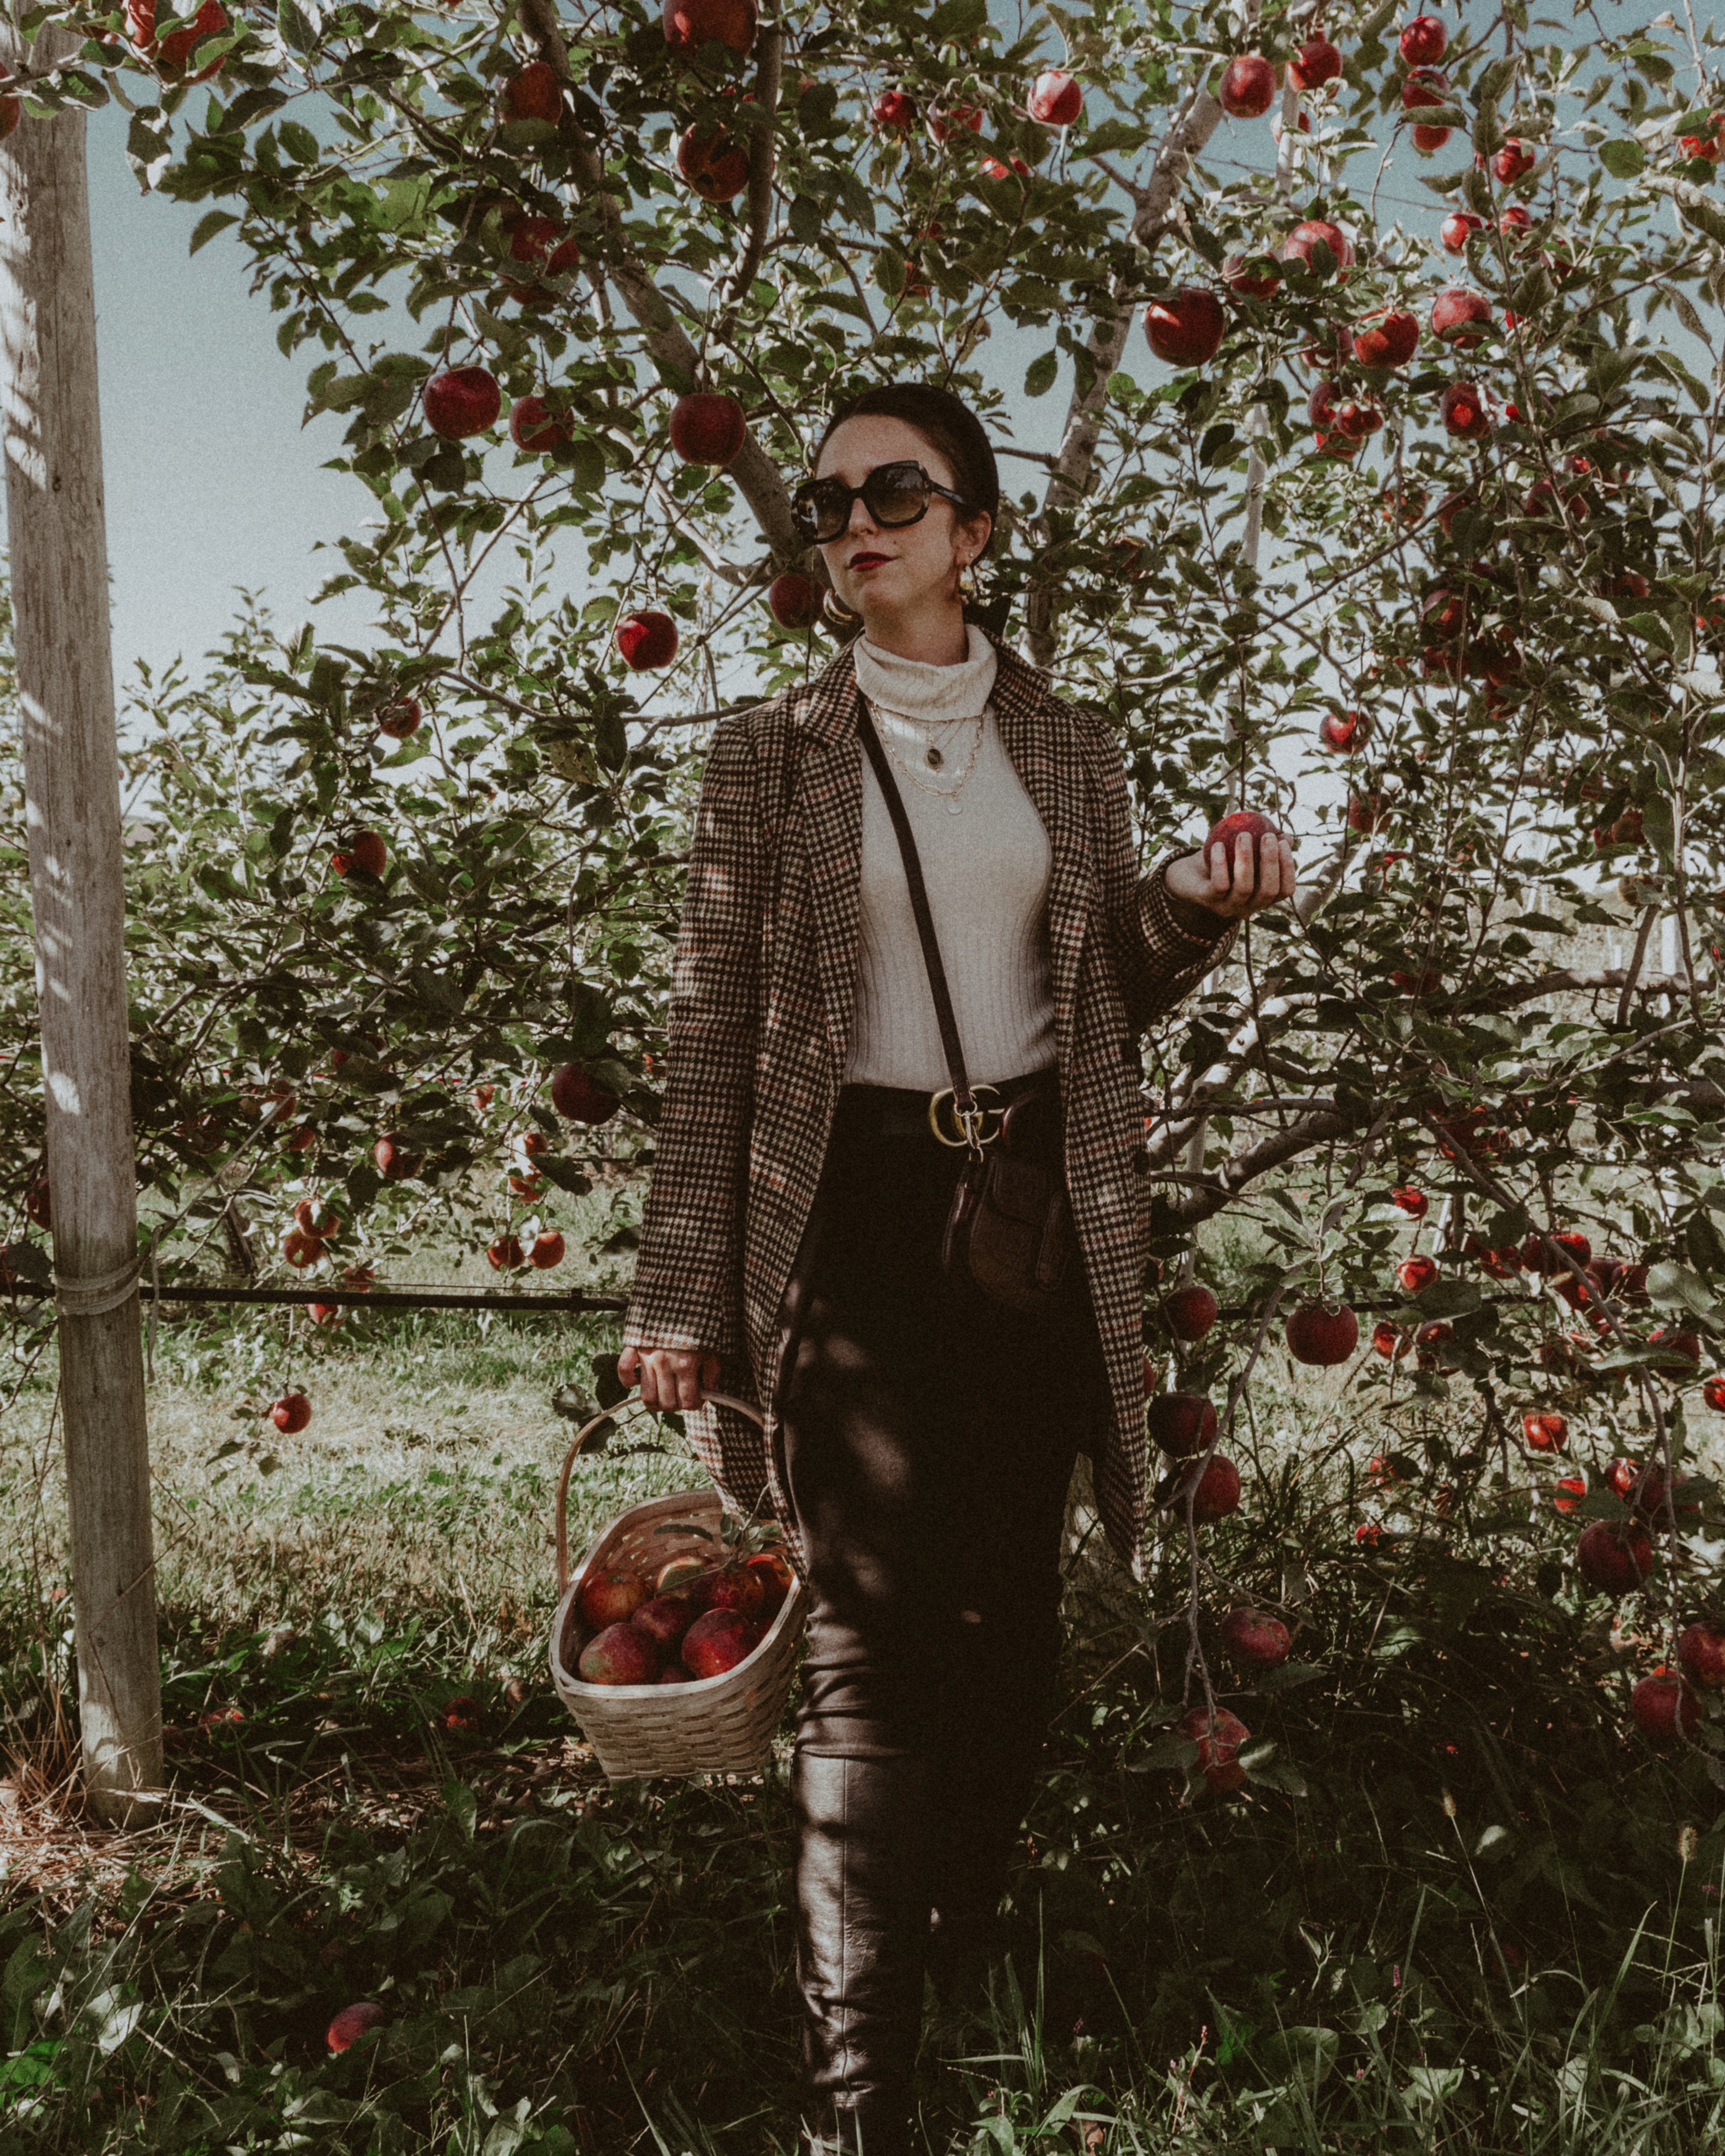 Girls Trip Apple Picking and Pumpkin Picking Outside of NYC - Simply by Simone - Simone Piliero - Fall Fashion - Fall Outfit - Fall Style - Apples - Tree - Louis Vuitton #fashion - Camel Coat - Black Jeans - Vans Sneakers - fashion poses - #outfit #style #fallfashion #falloutfit #westchestercounty #dutchesscounty #nyc #northofnyc #suburbs #pumpkinpicking #bloggerstyle #outfitinspiration #poseinspiration #applepicking 